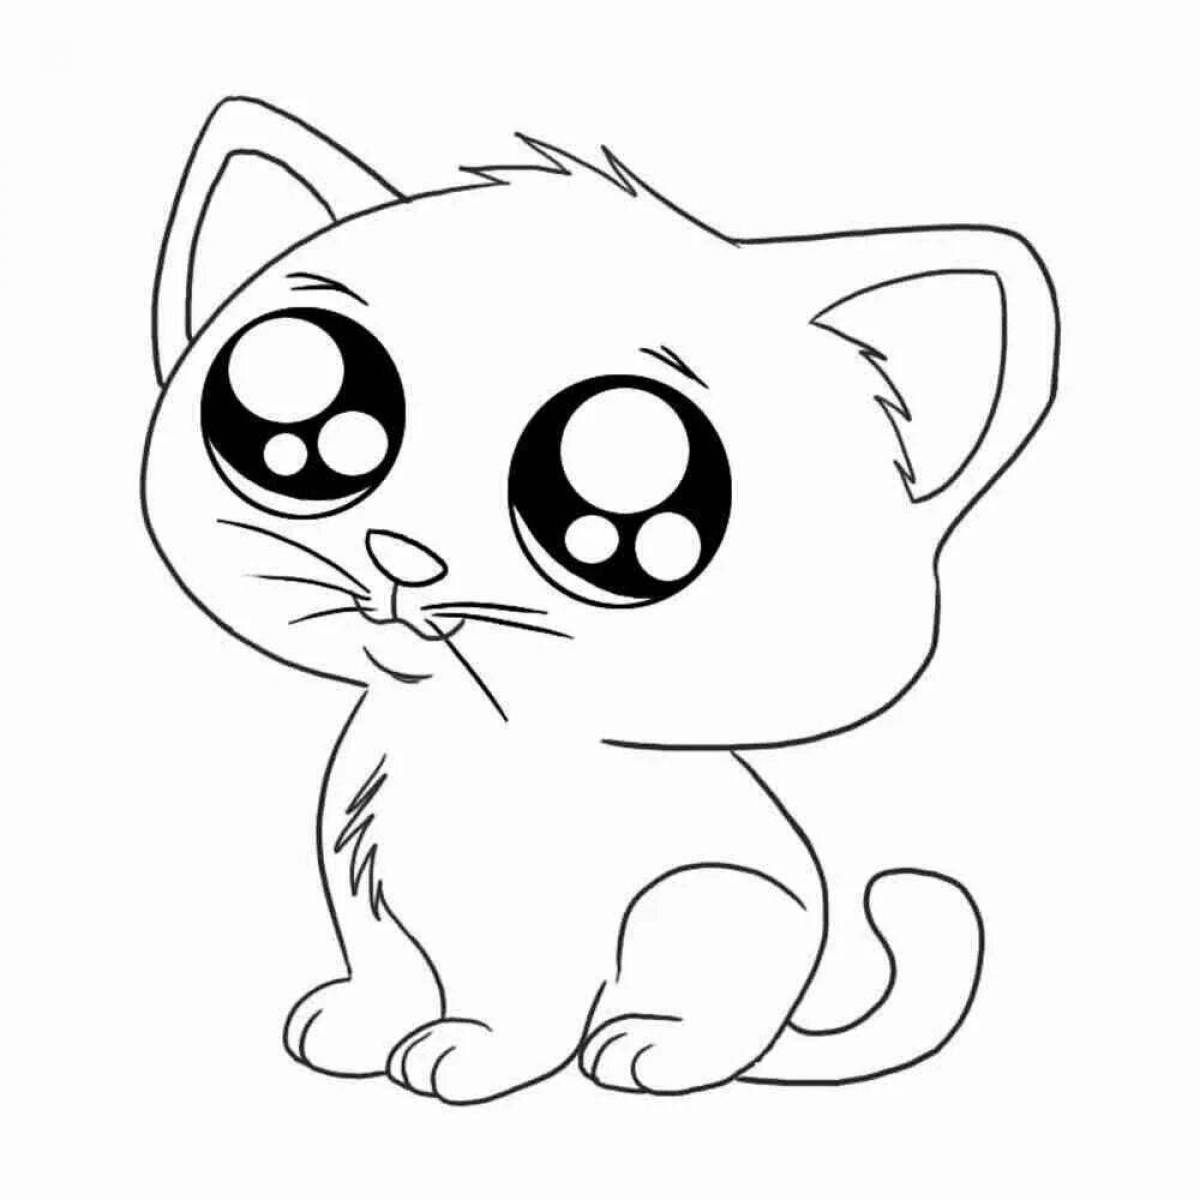 Coloring page sly cute cat